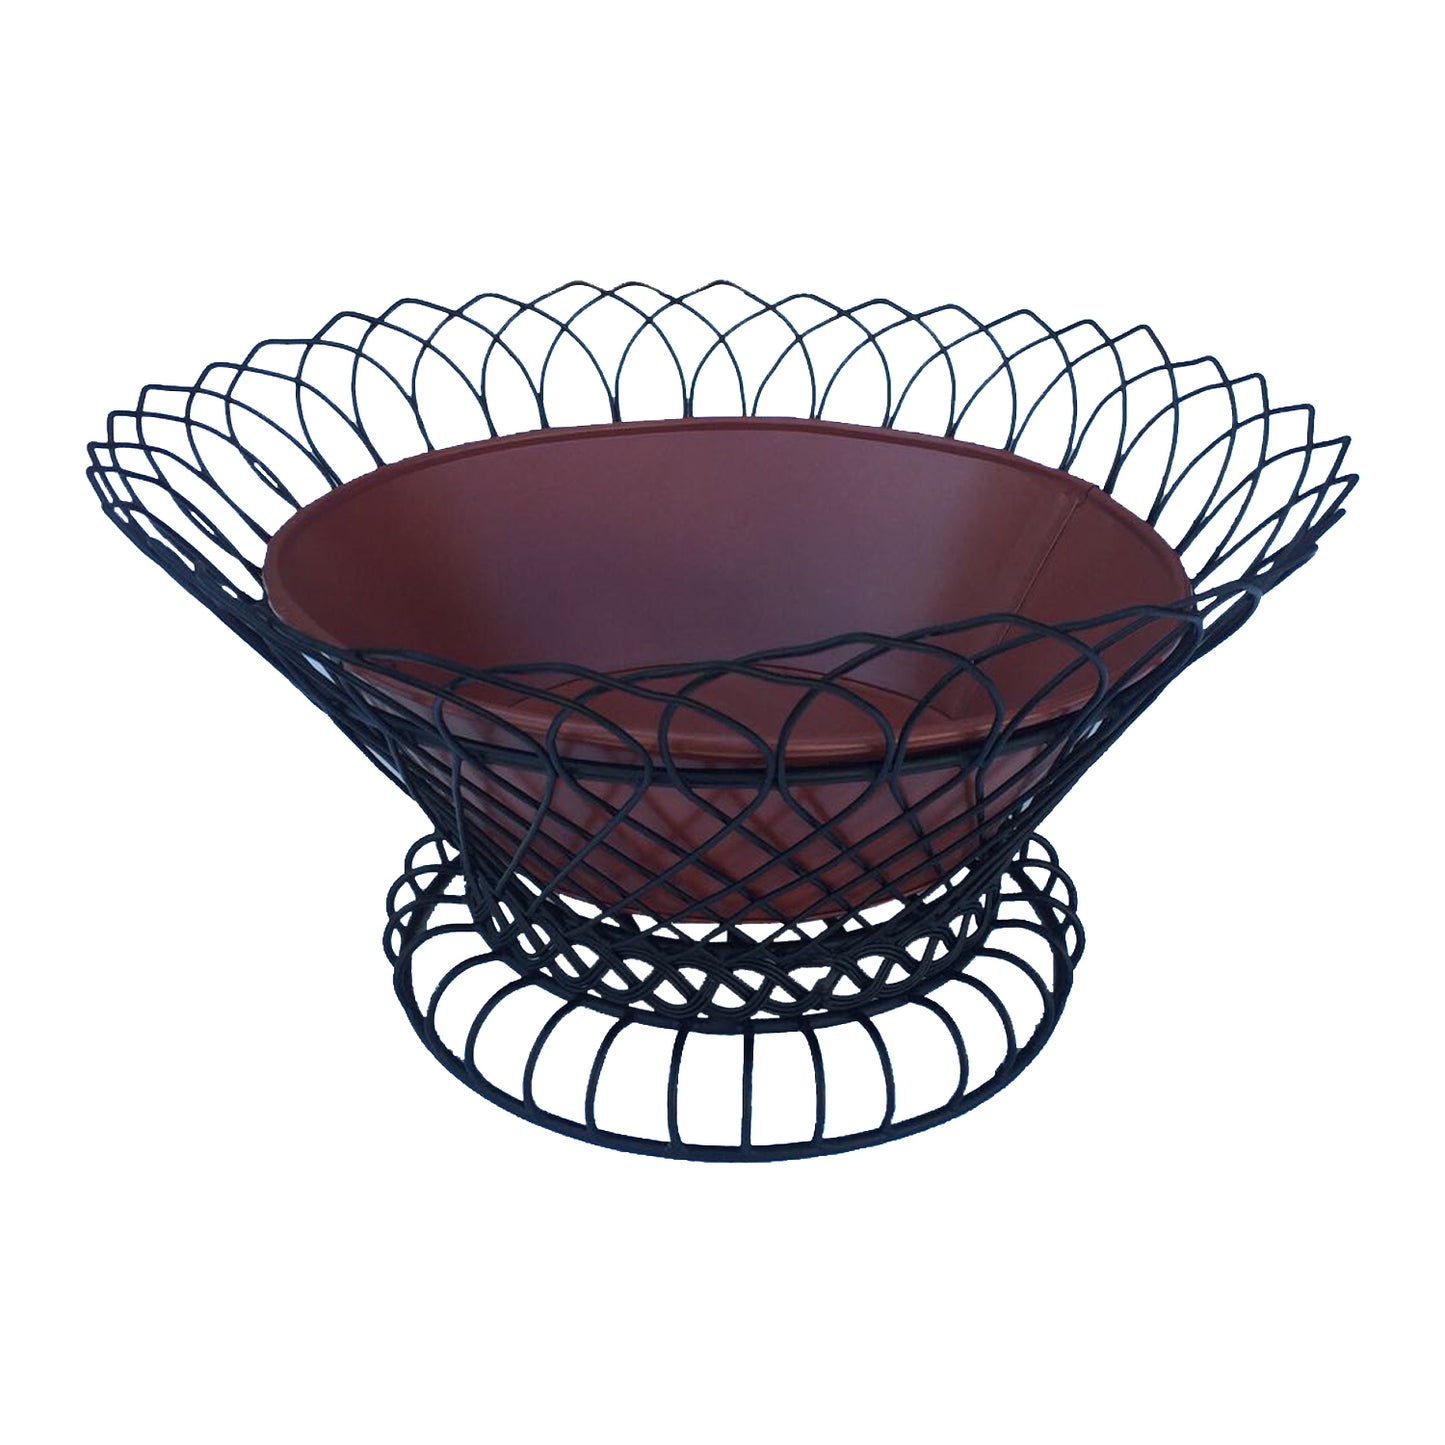 GiftBay 808-BR Wire Bowl & Pot Black & Red Container.14" Diameter, Very Unique and Strongly Built for Multi- Purpose Use